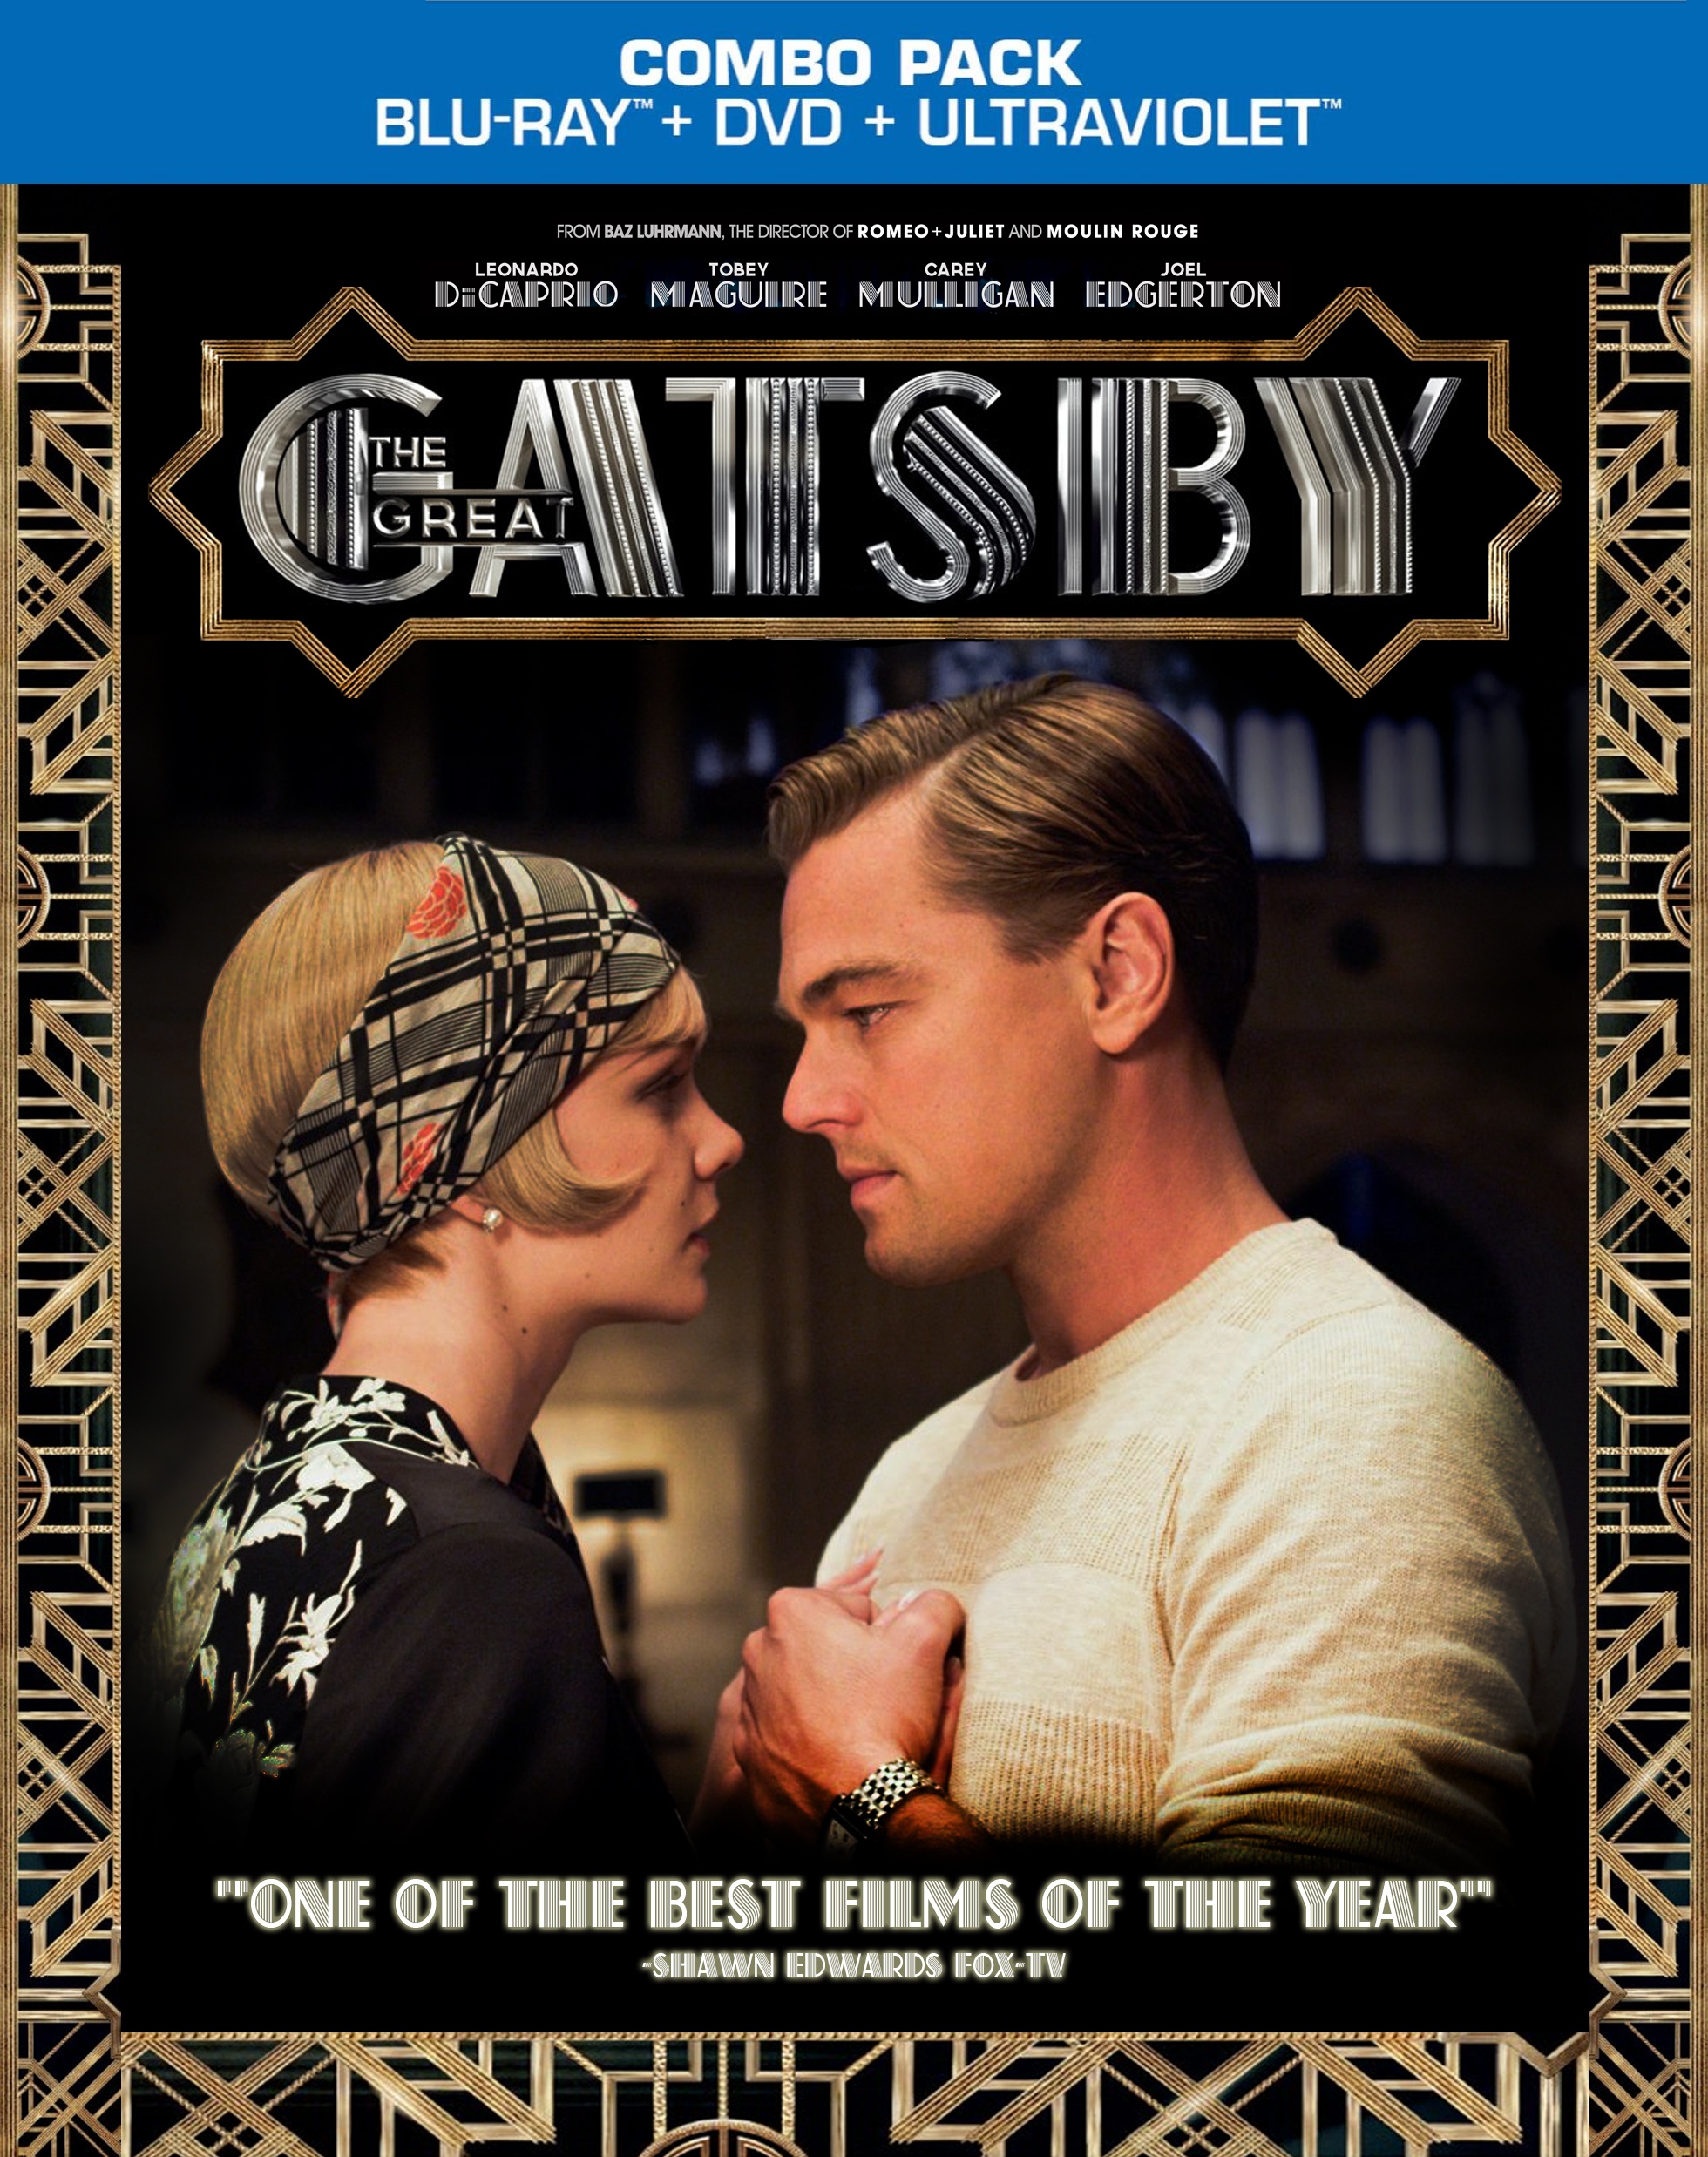 The Great Gatsby (2013) Blu-ray box cover